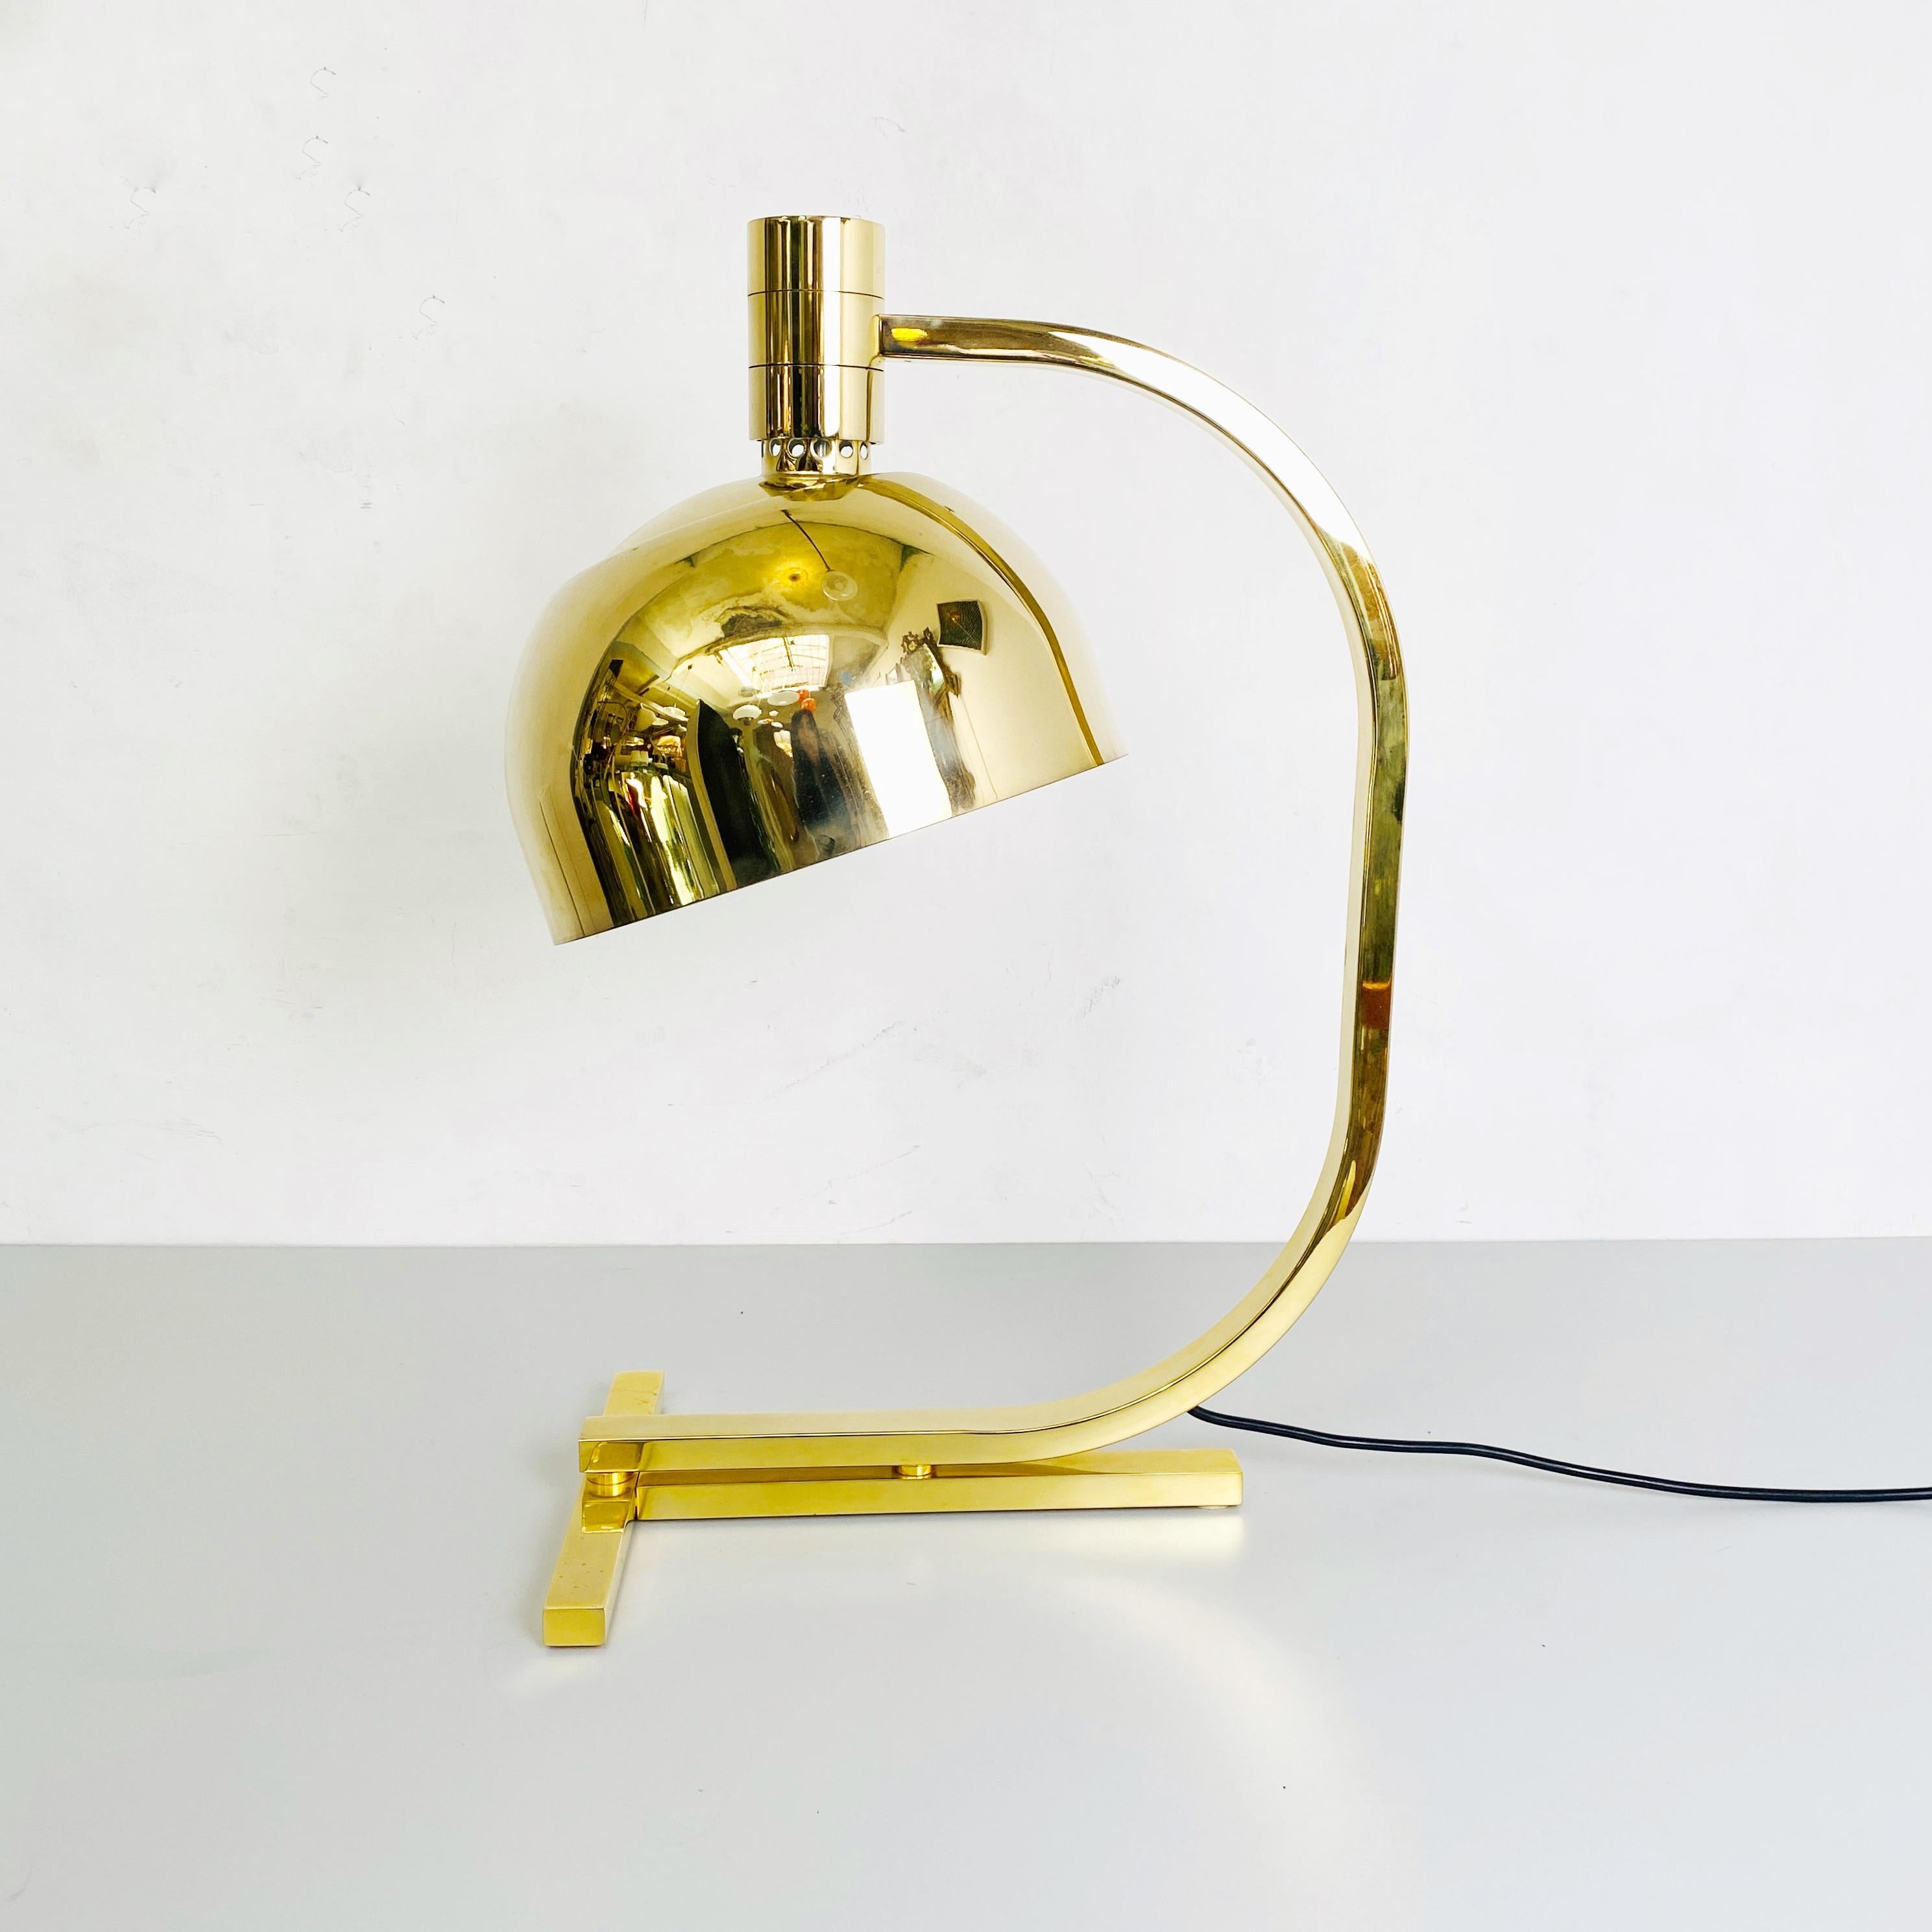 Italian AM \ AS Gold Chrome Table Lamp by Franco Albini and Franca Helg for Sirrah, 1969 For Sale